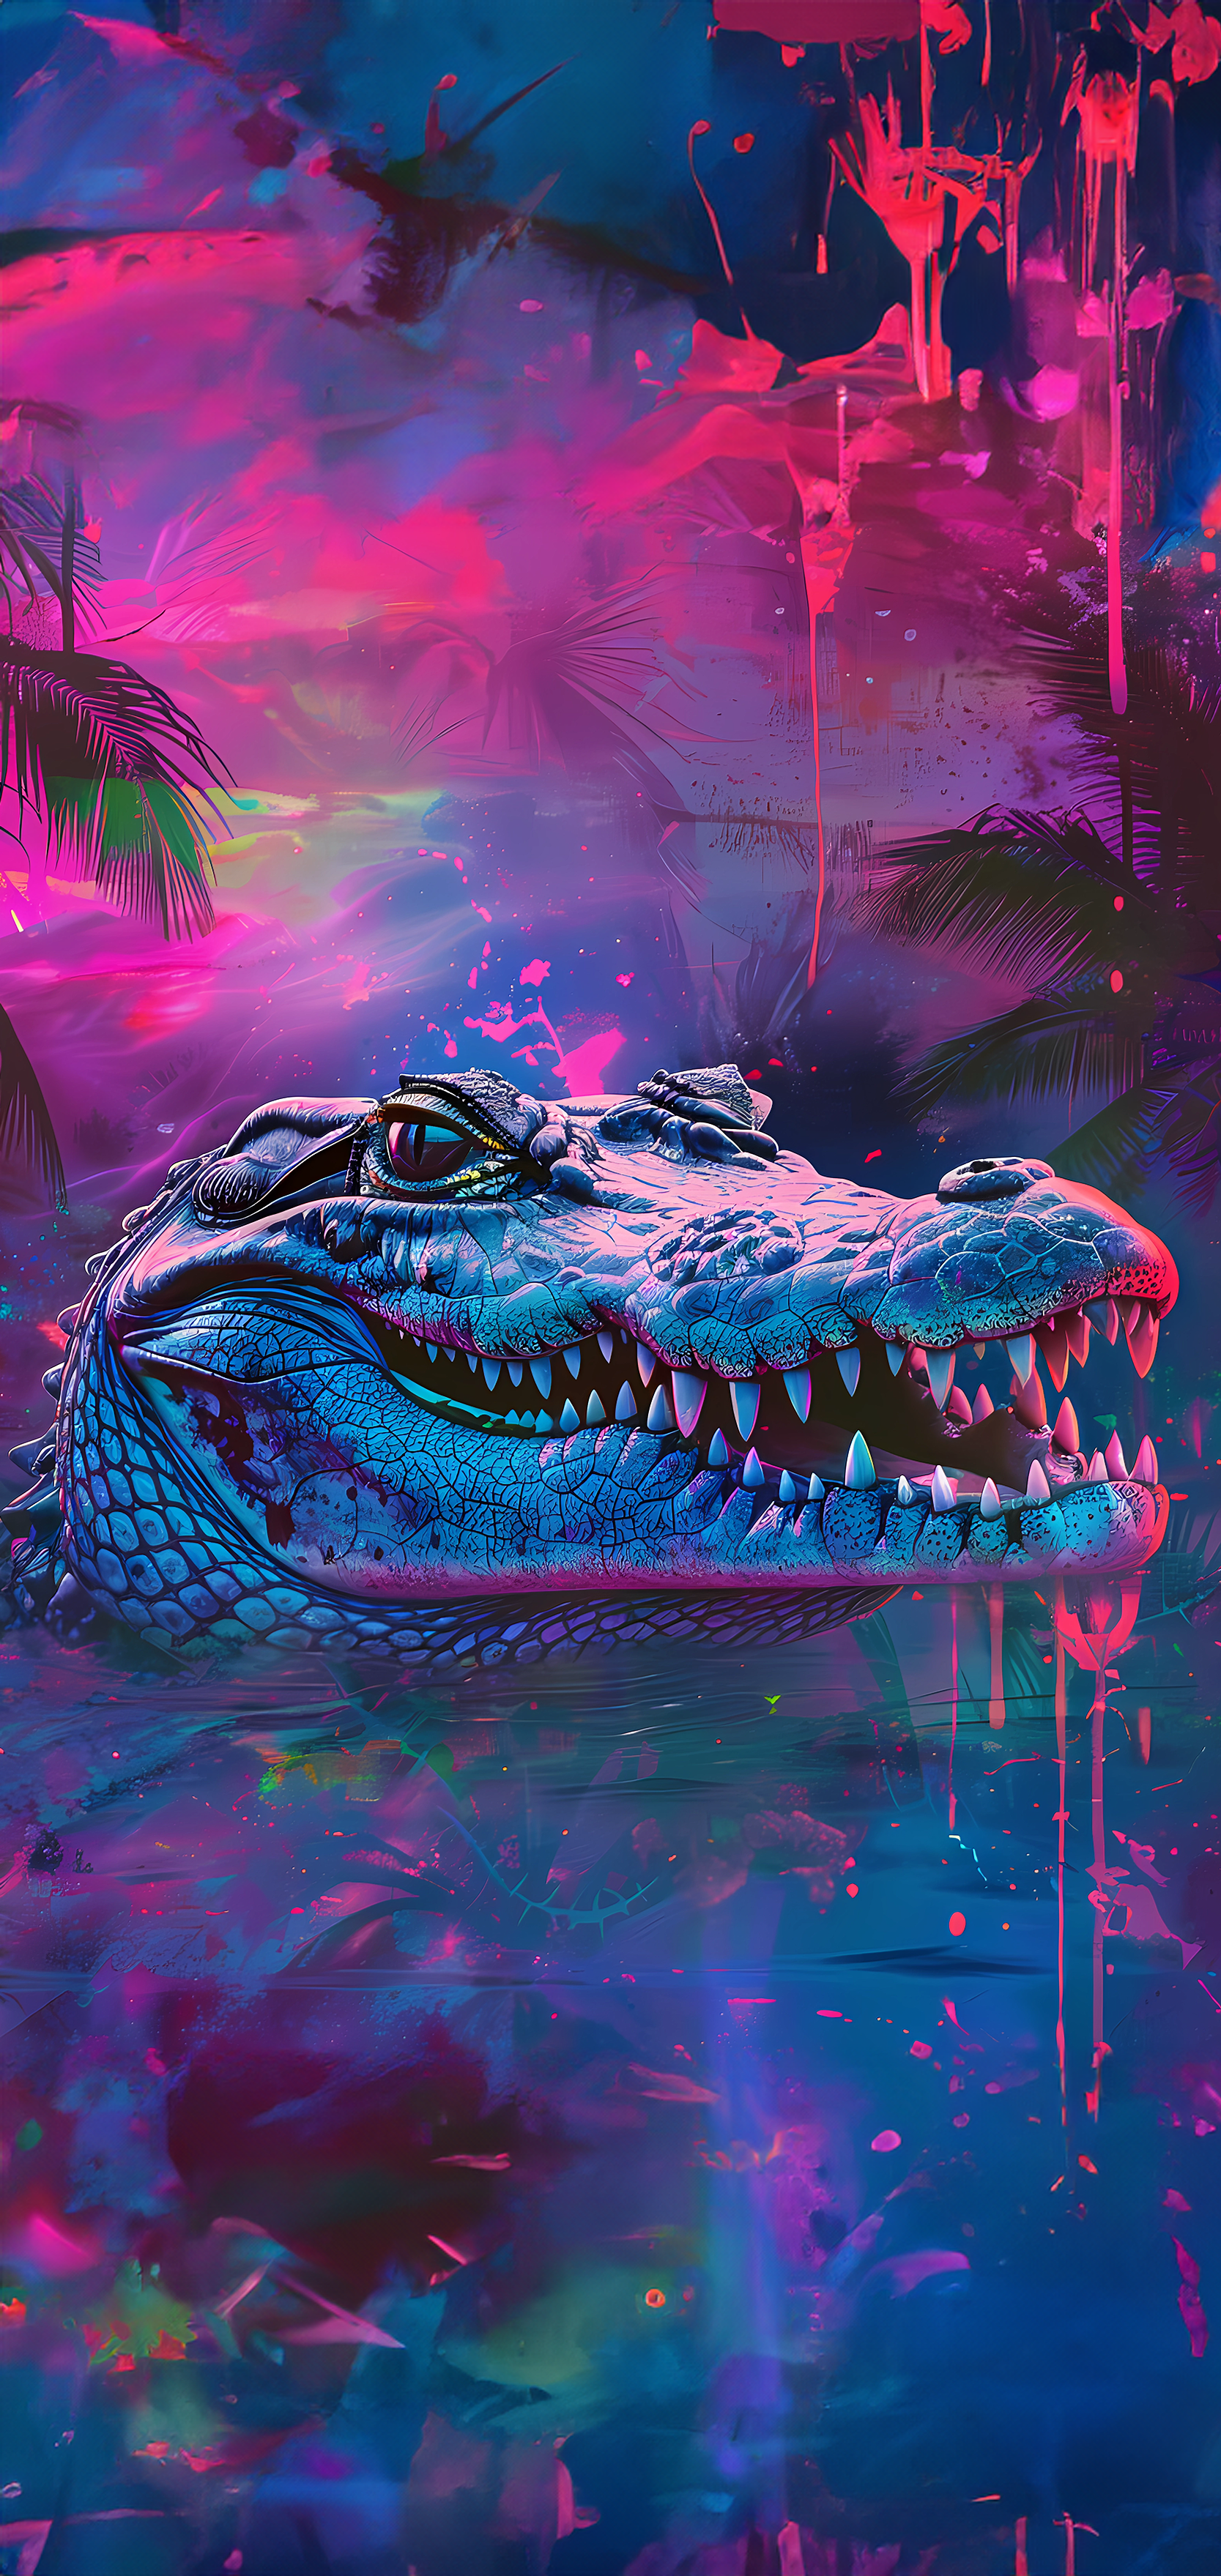 Illustrative iPhone wallpaper of a crocodile with psychedelic neon colors
reflecting in water, perfect for a bold, jungle-themed backdrop.